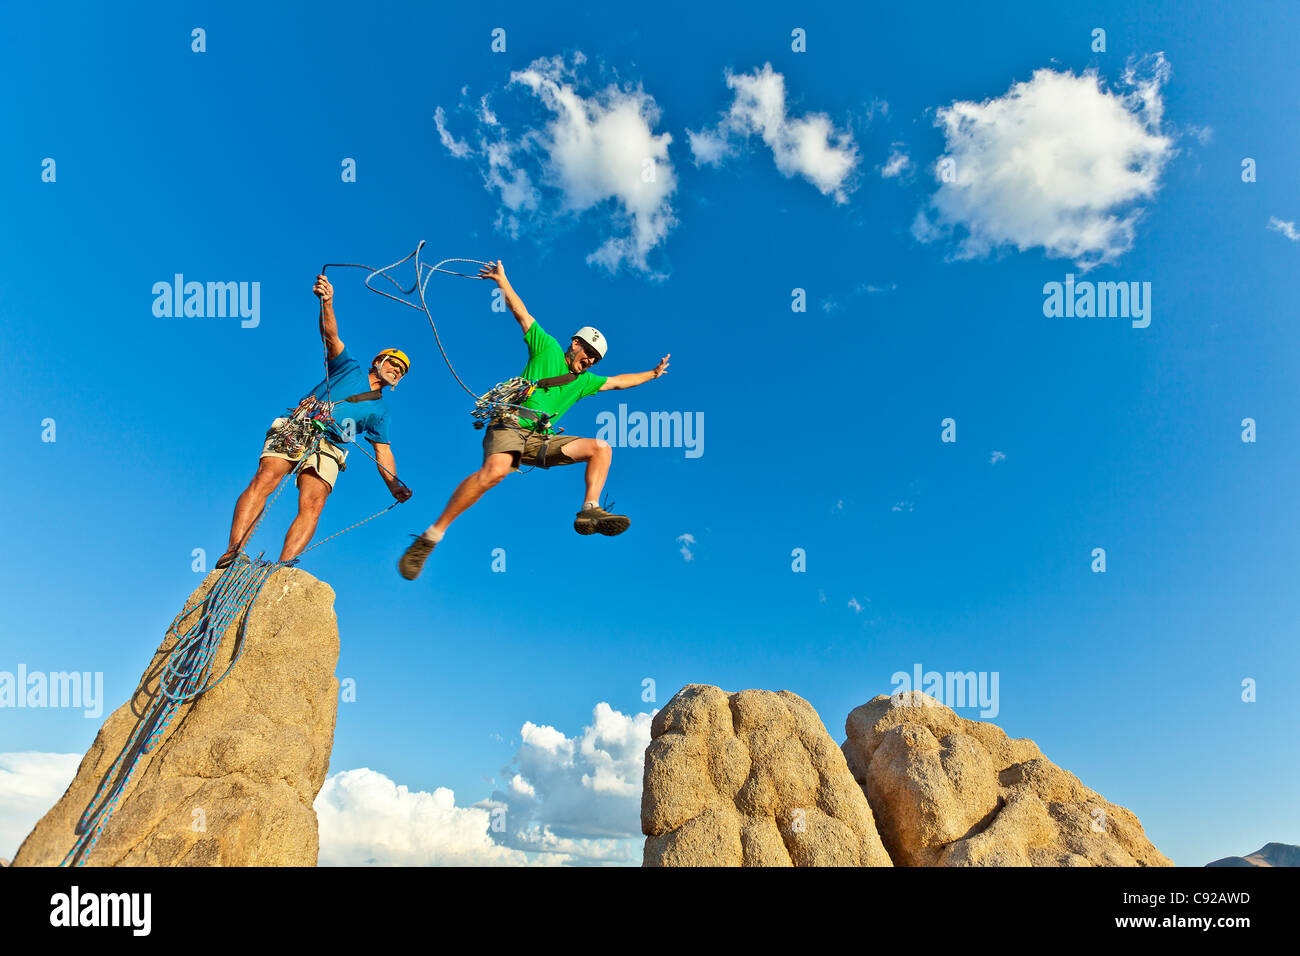 Team of climbers struggle to the summit of a rock pinnacle after a challenging ascent. Stock Photo